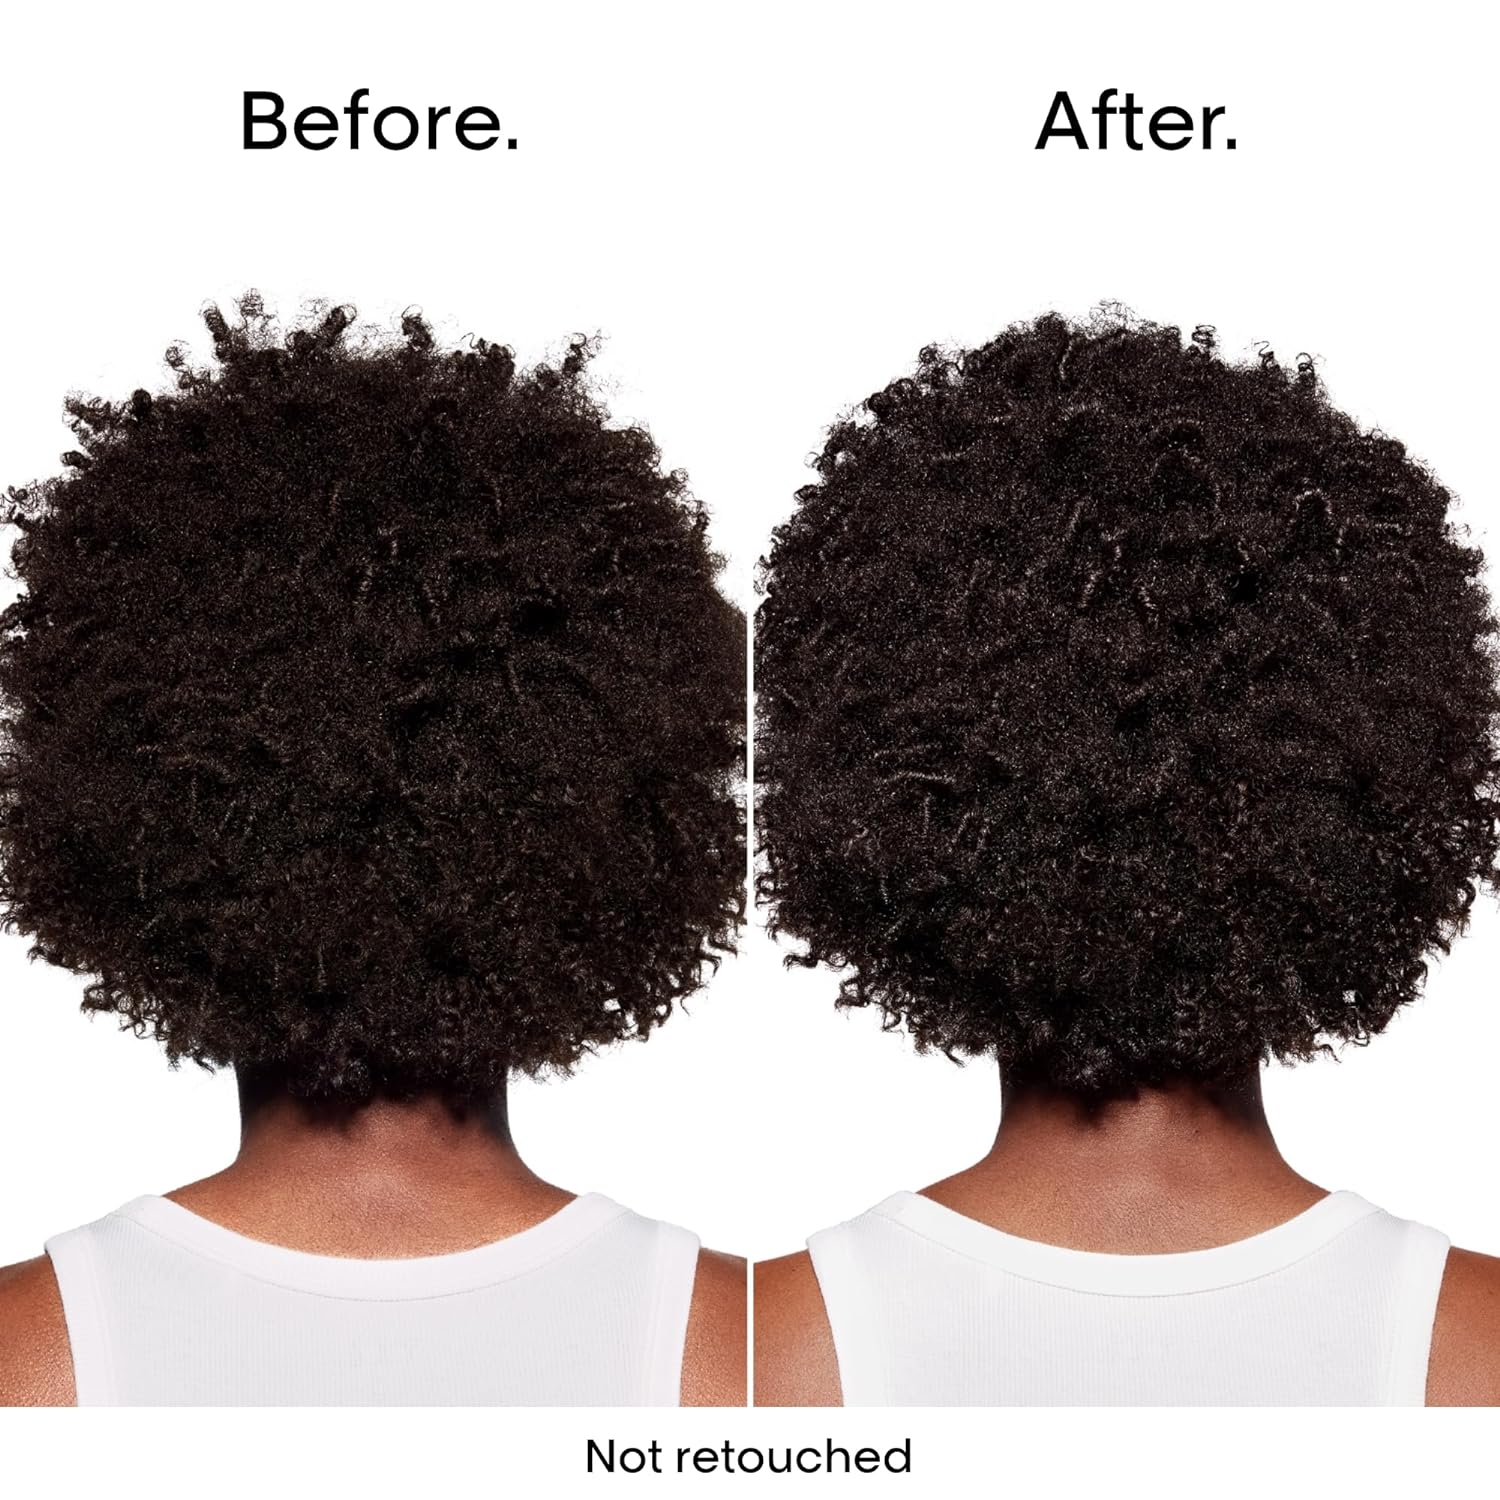 L'Oréal Professionnel Absolut Repair Molecular Repairing Leave-in Mask before and after